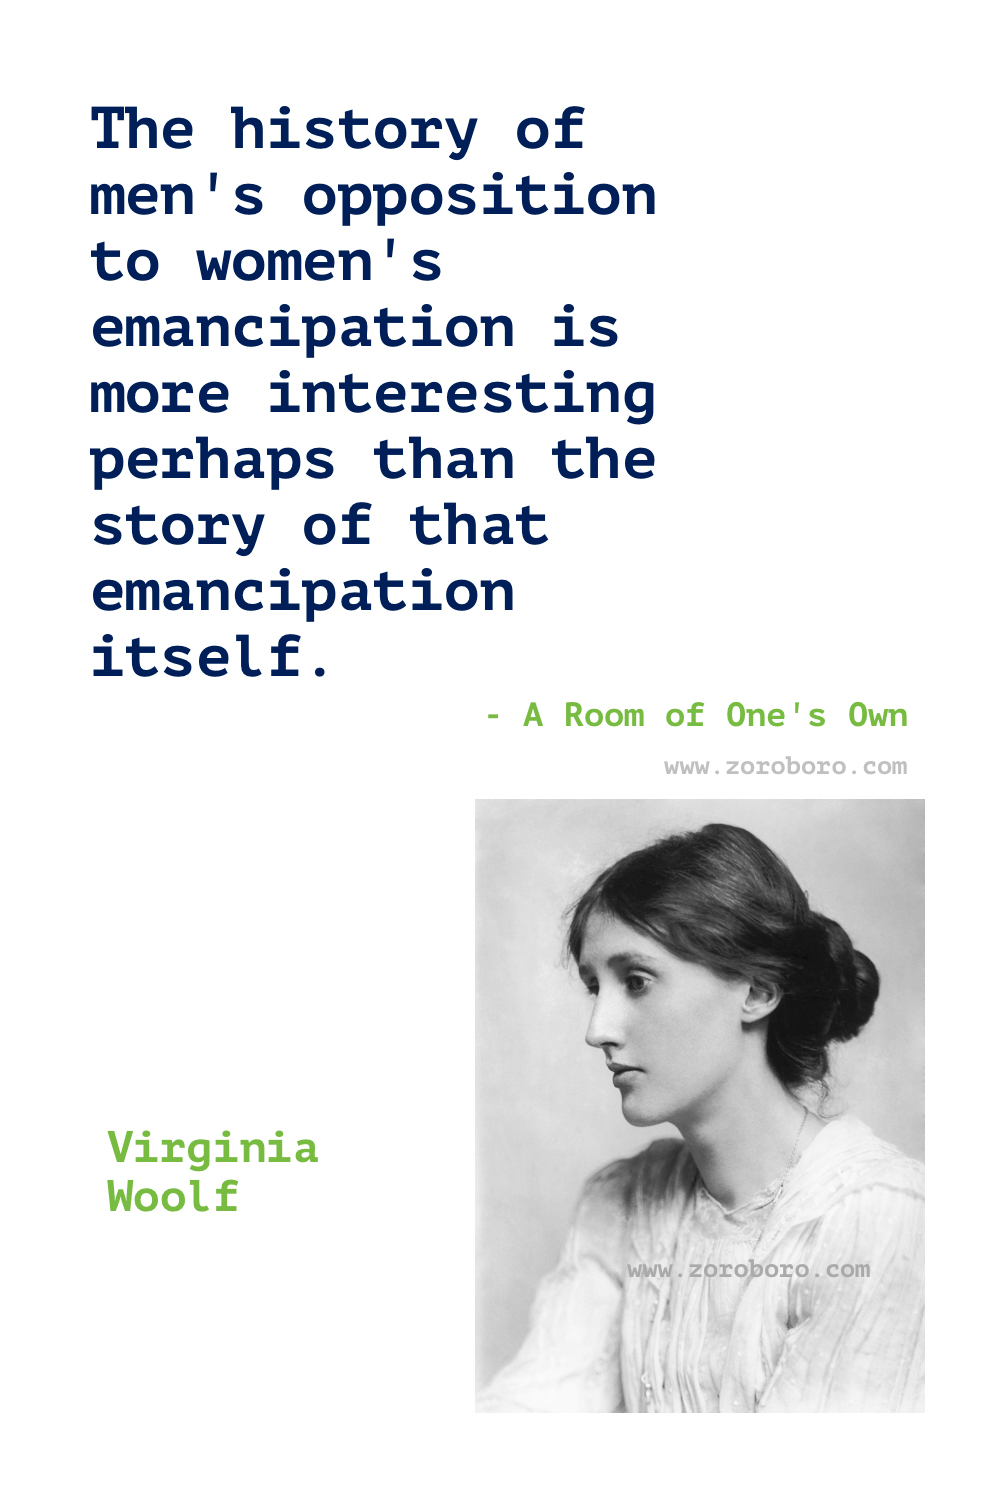 Virginia Woolf Quotes, Virginia Woolf Books Quotes, Mrs Dalloway, A Room of One's Own, To the Lighthouse & Orlando Quotes, Virginia Woolf Poems, Virginia Woolf Feminism Quotes, Women Quotes.Virginia Woolf Feminist Quotes.